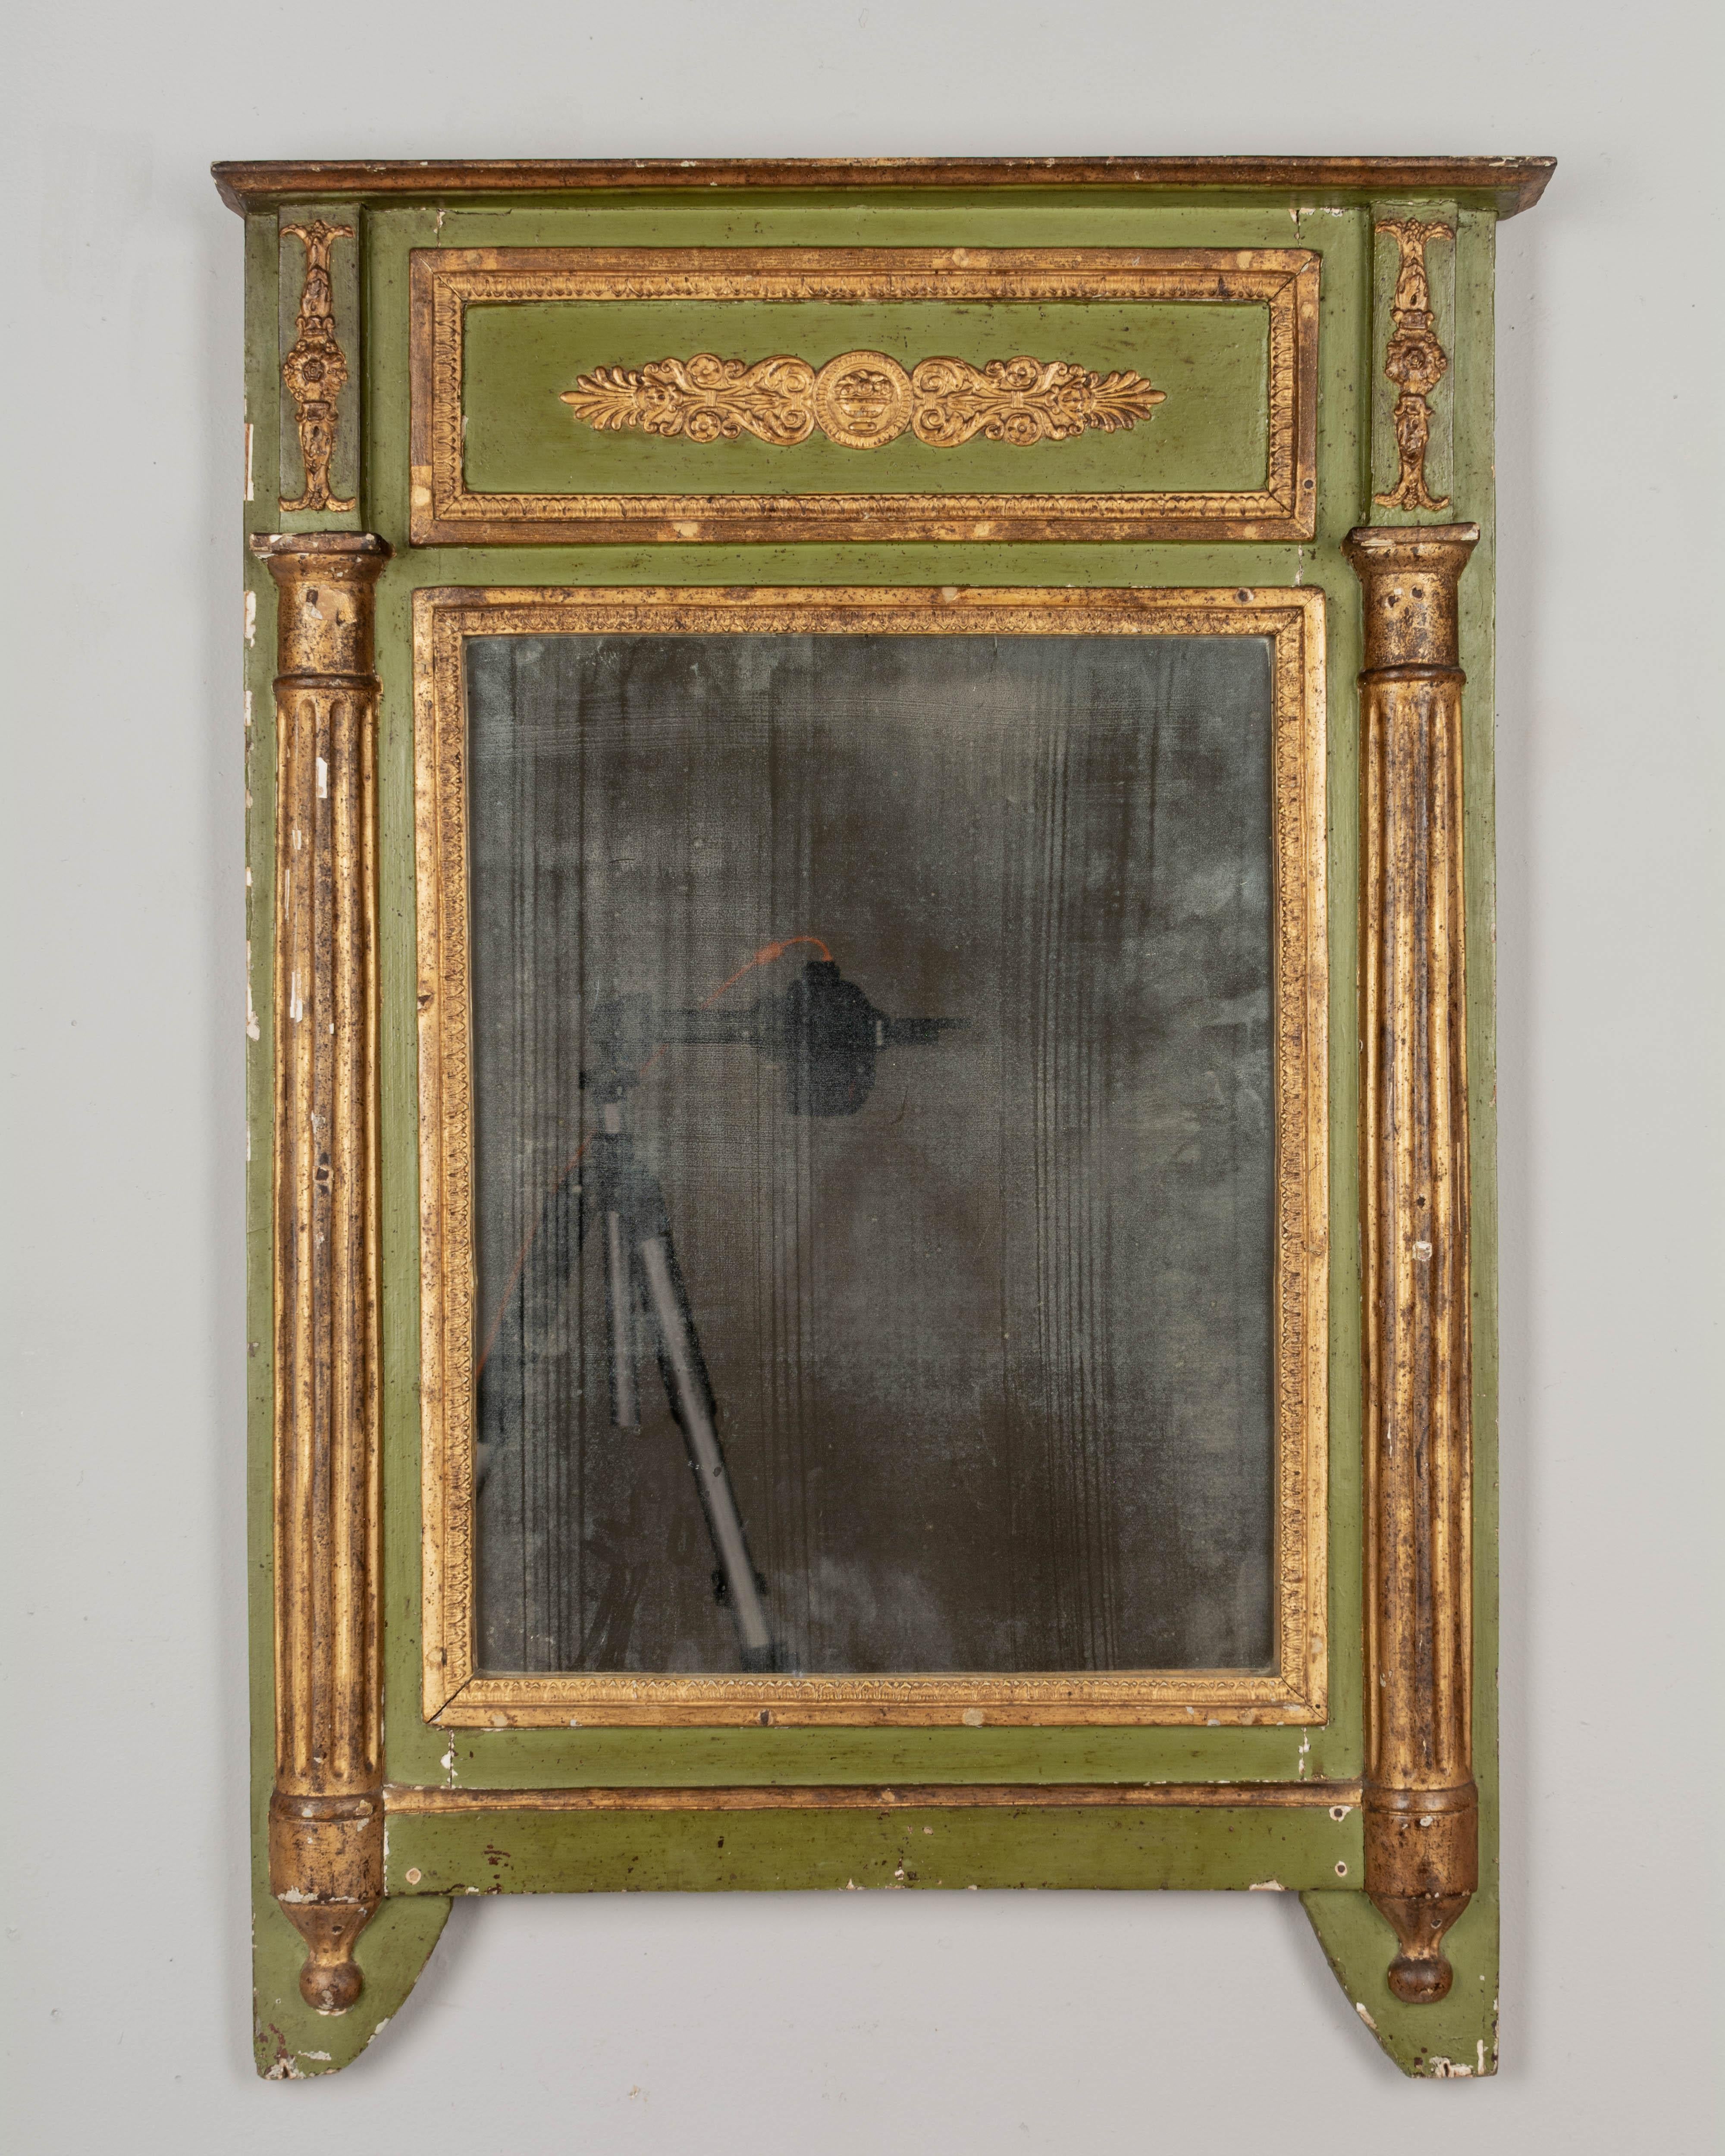 An early 19th century French directoire period parcel gilt mirror. Architectural green painted frame with three dimensional fluted columns and a gilt frieze decorated in low relief. Original mirror with fogged patina. Original finish with losses